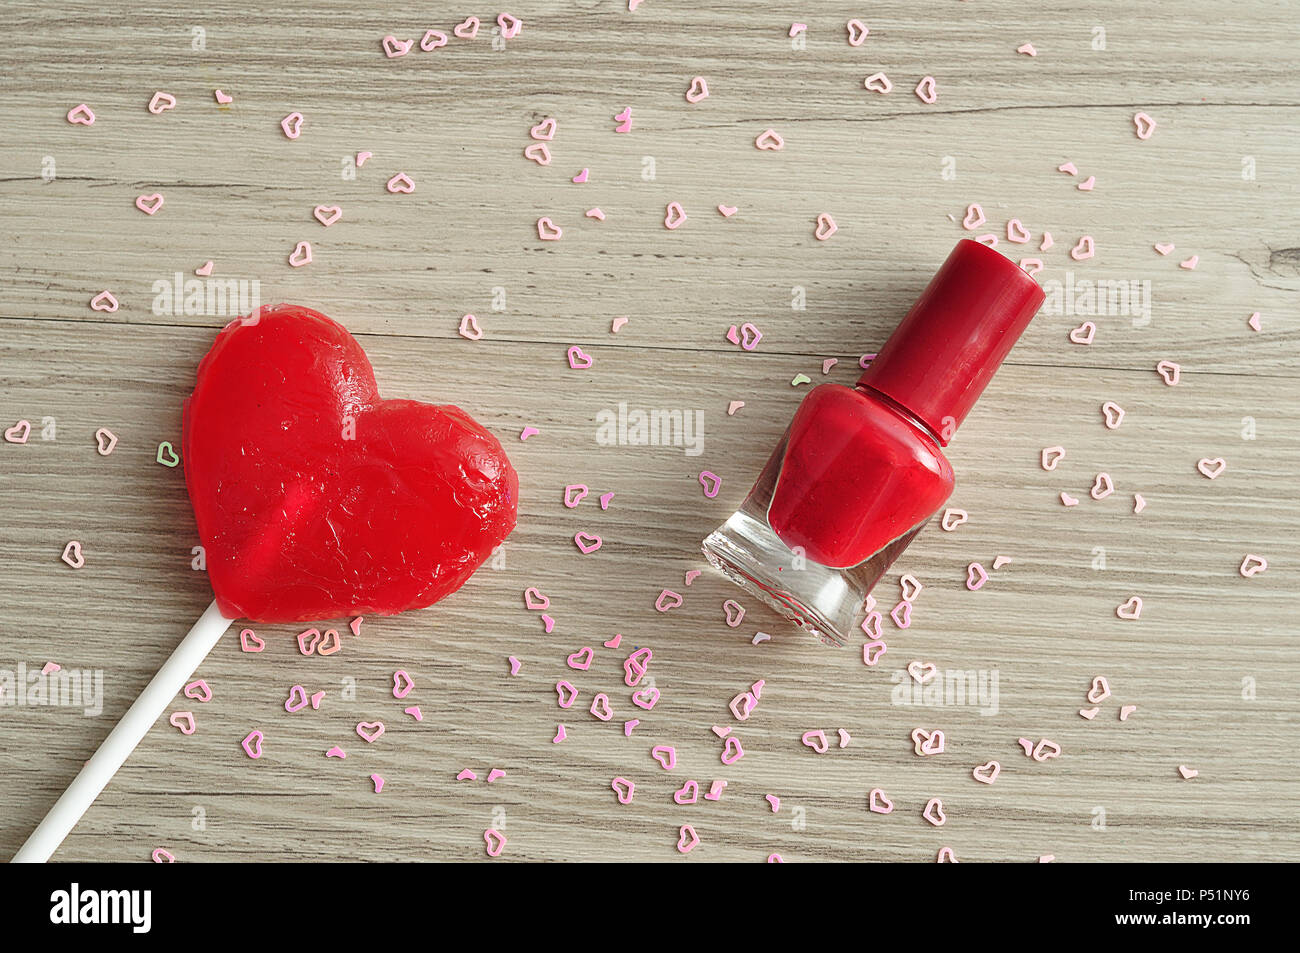 Red nail polish displayed with a red heart shape lollipop and pink heart nail art on a wooden background Stock Photo